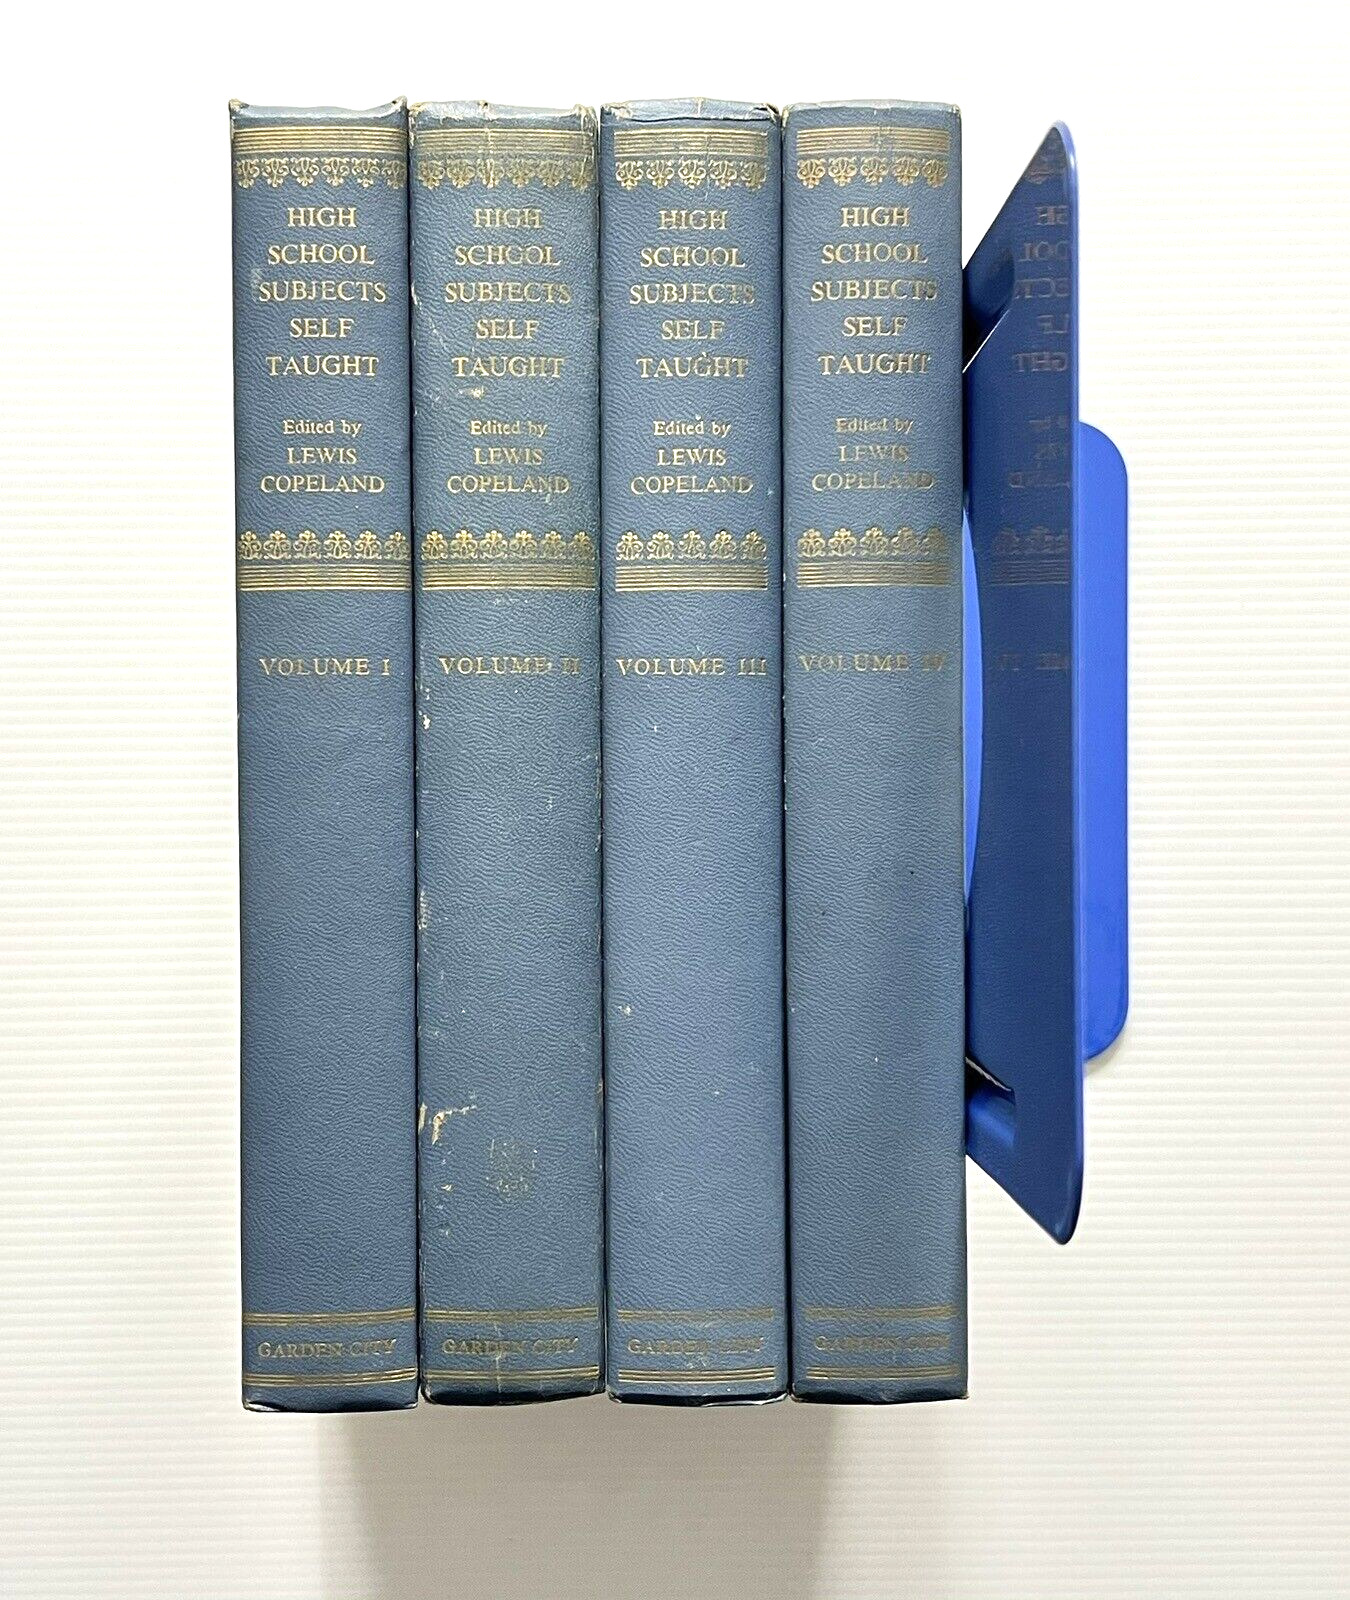 High School Subjects Self Taught Edited by Copeland 4-Volume Set HC 1959